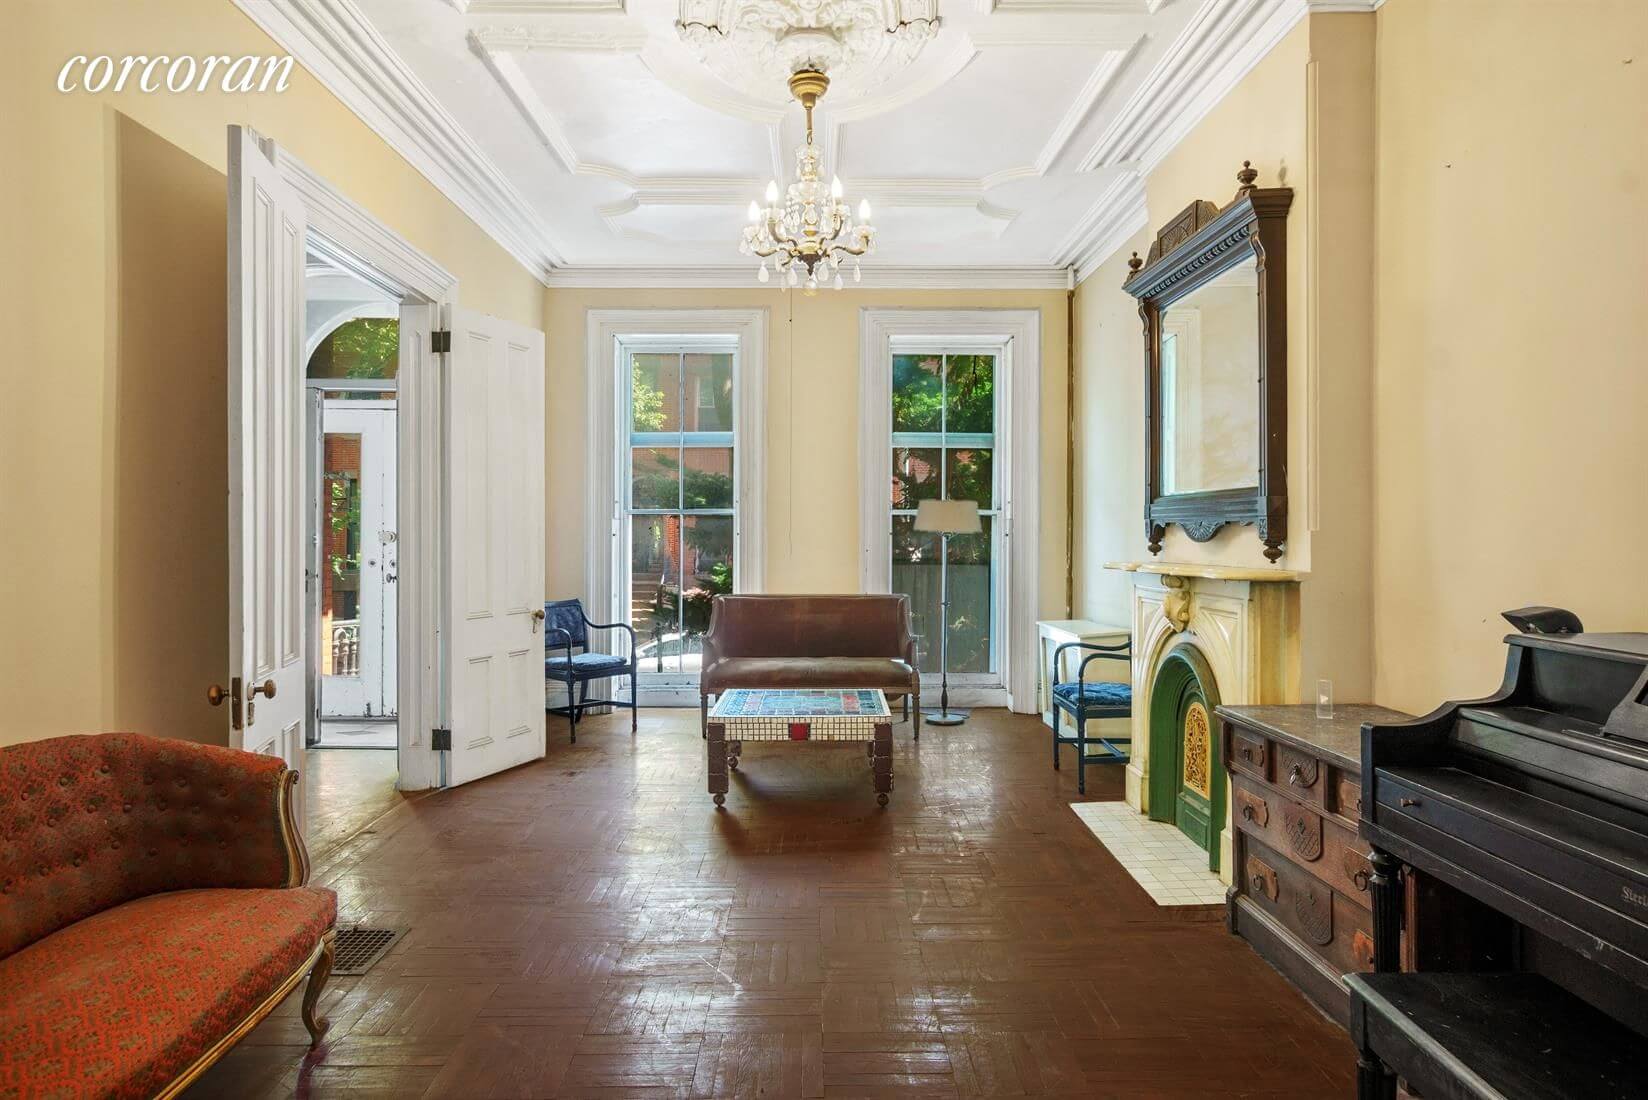 In Need of Work, Boerum Hill Row House With Mantels, Plasterwork Asks $3.15  Million | Brownstoner